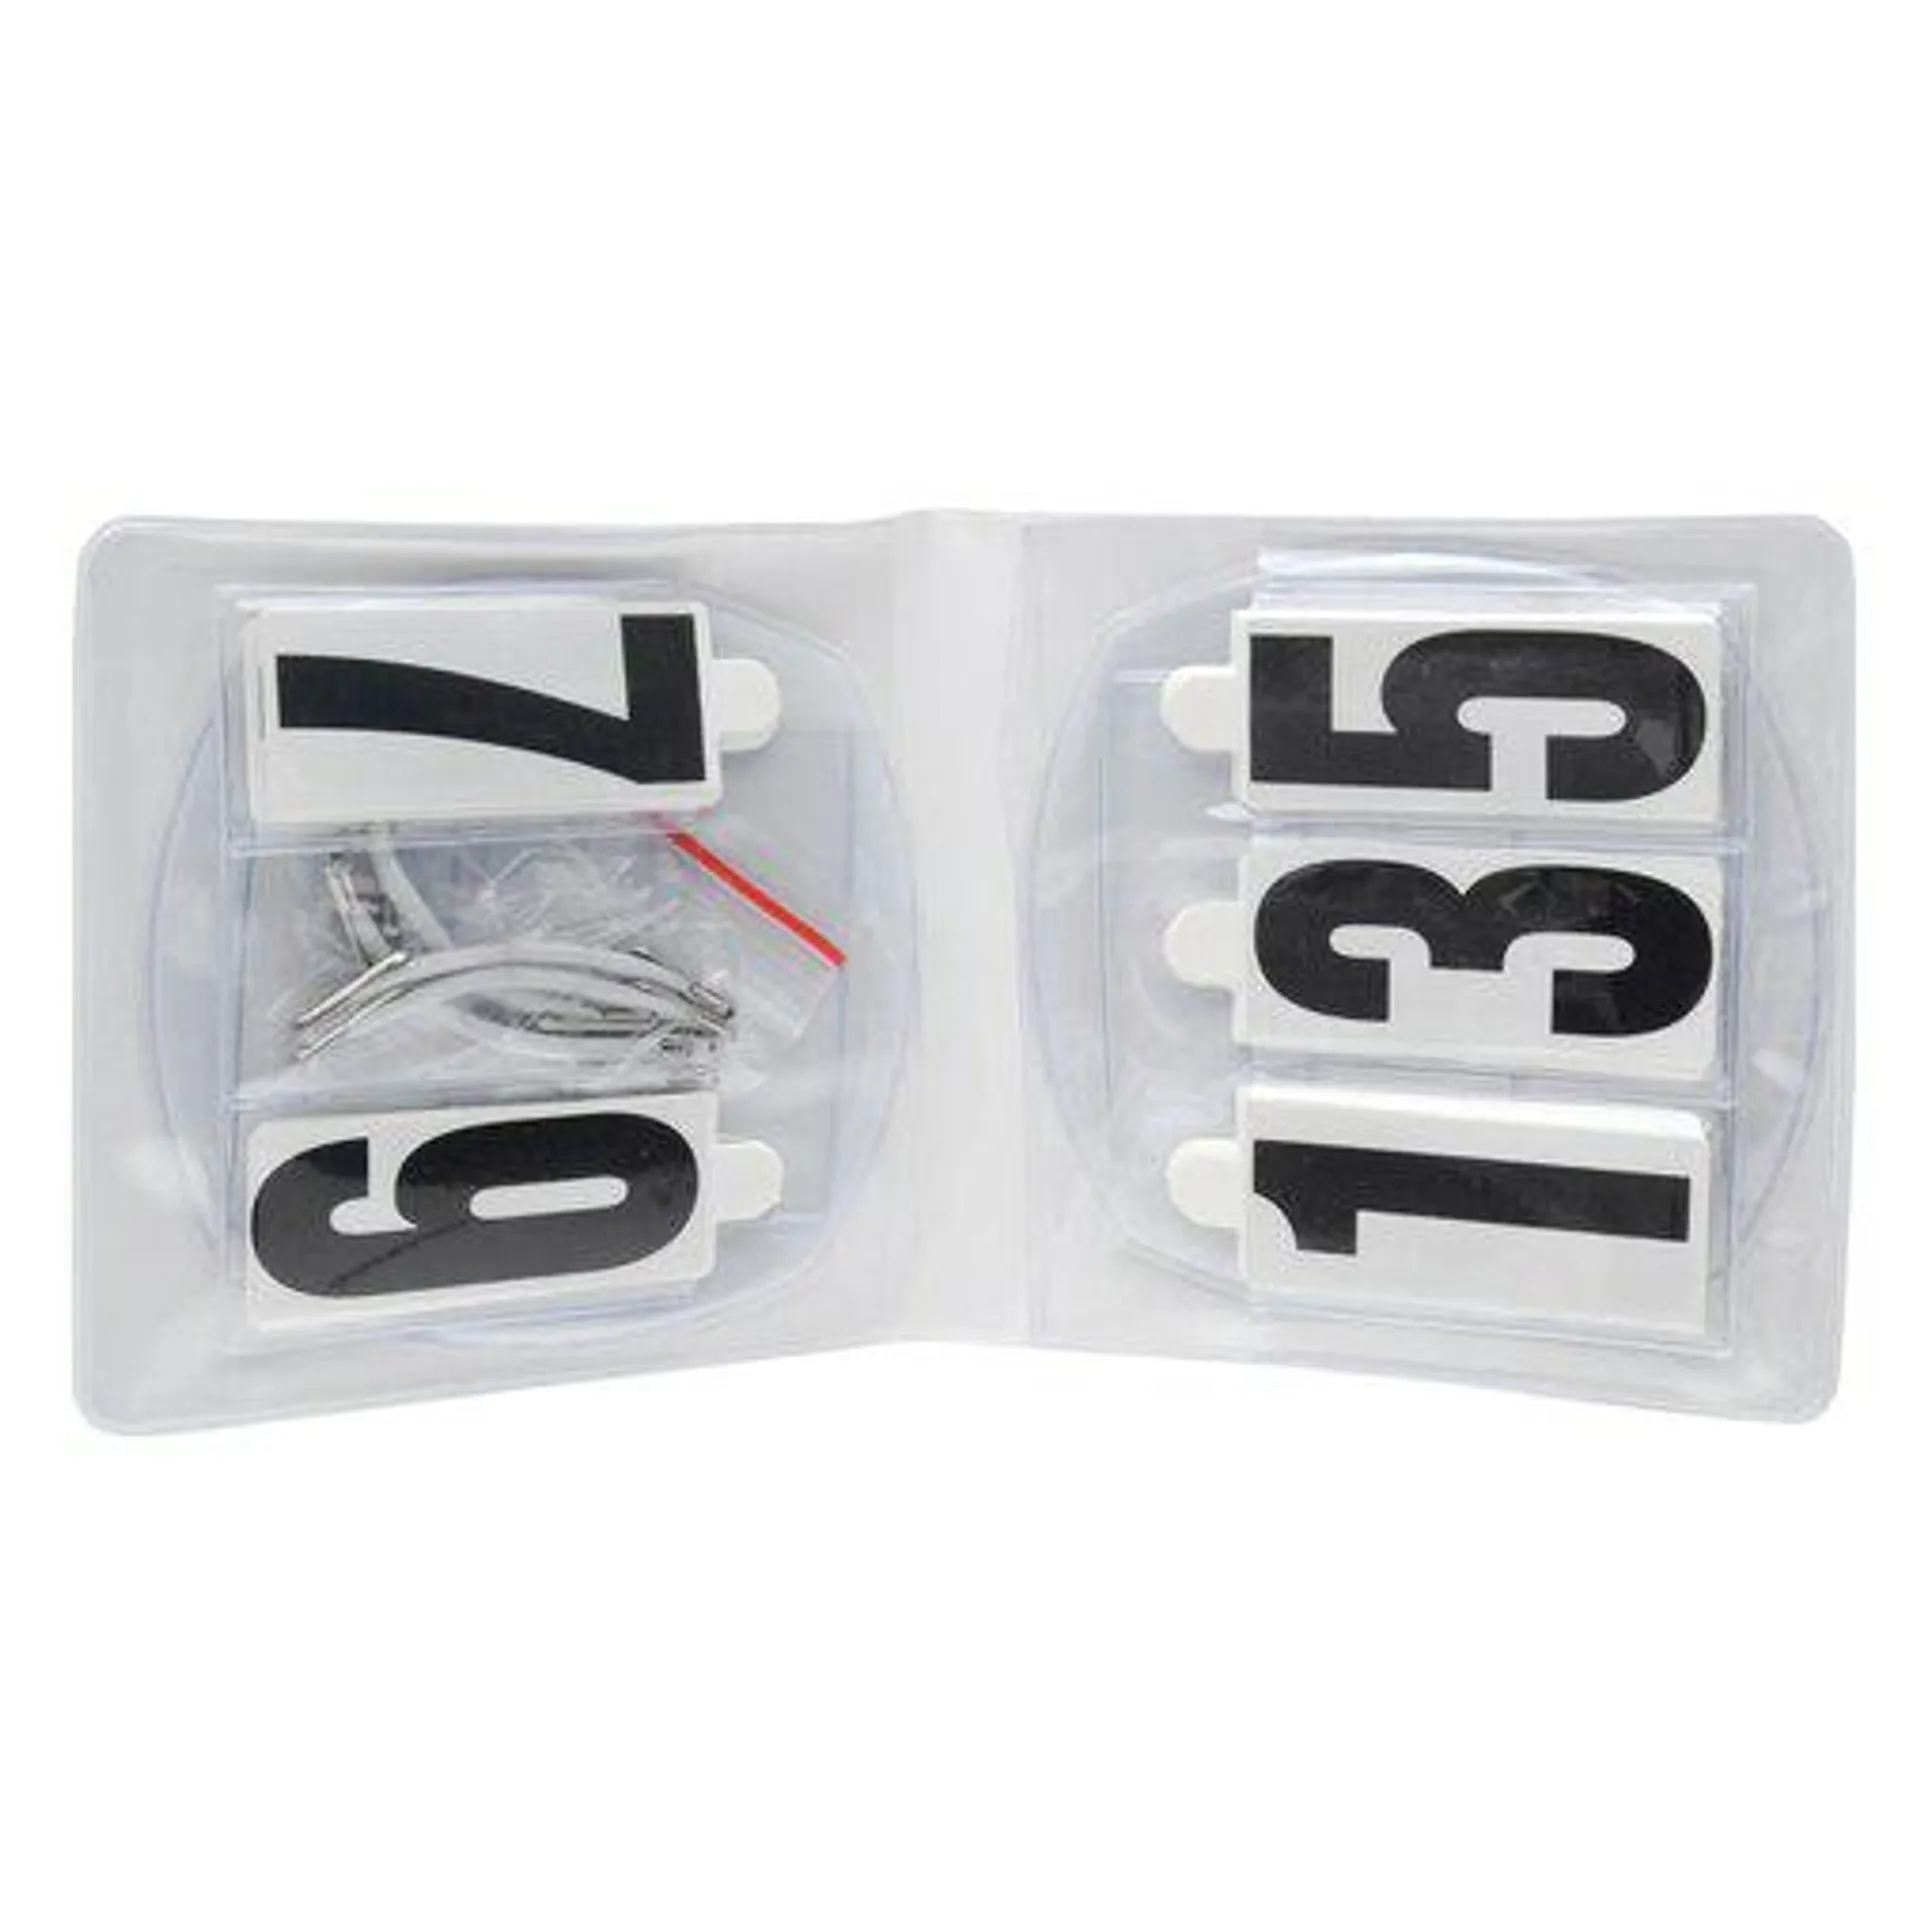 Roma Competition Oval Number Holder